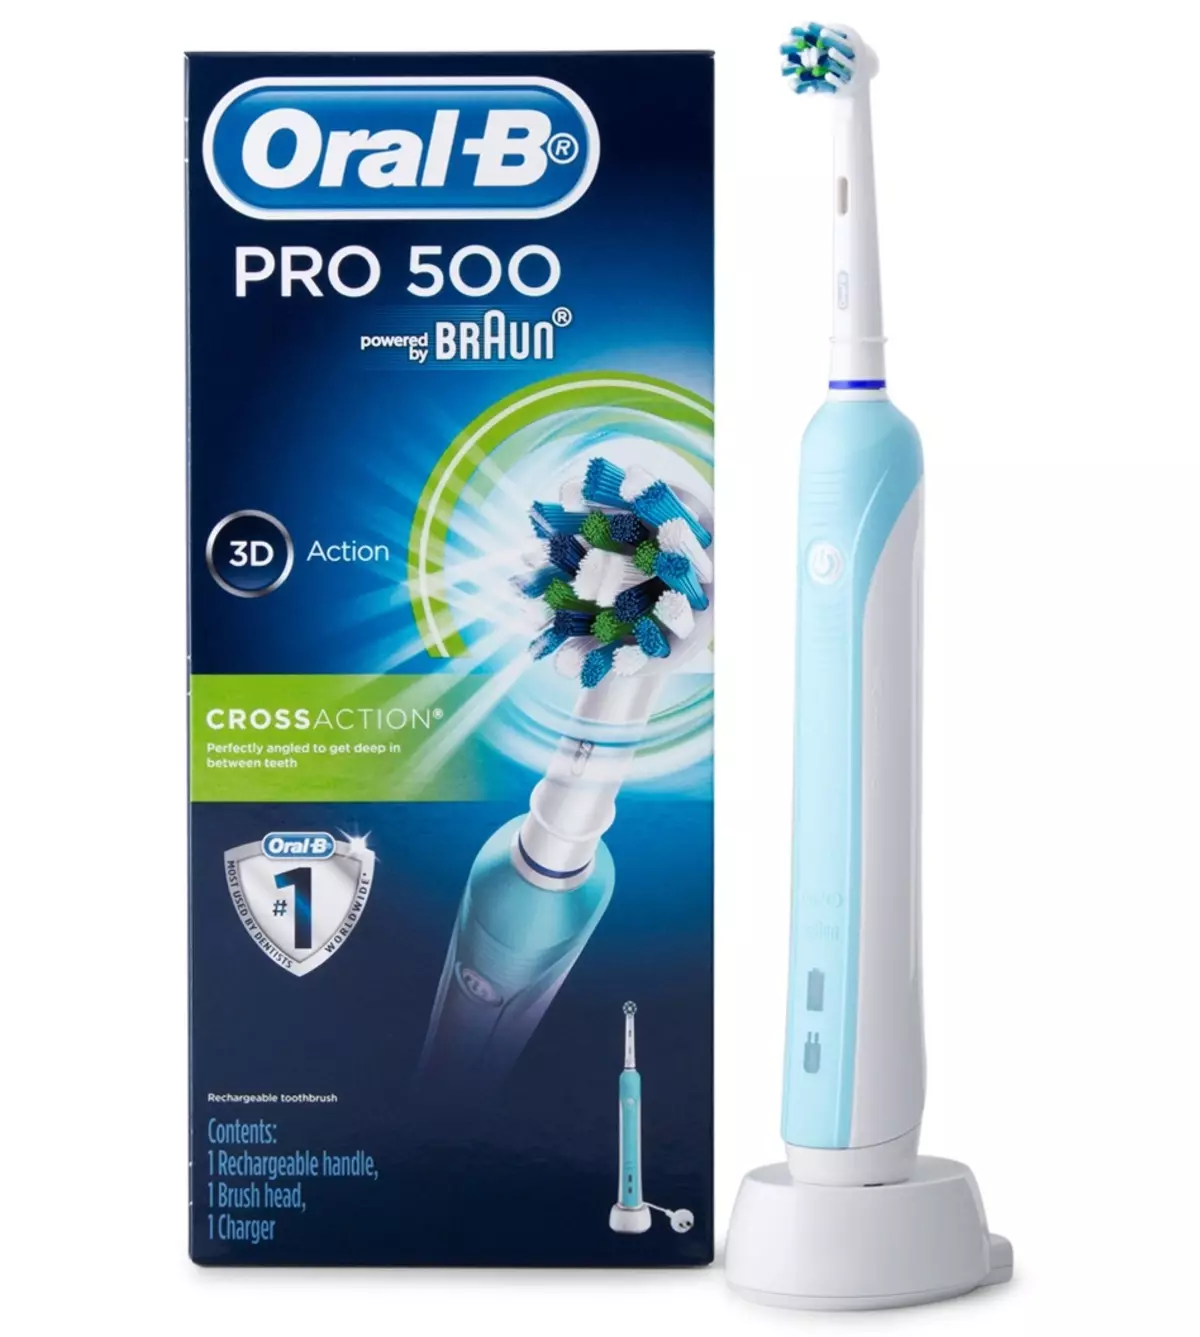 Electrical Toothbrushes Oral-B: Vitality and Pro 500, CrossAction and 3D White, Smart 4 and other Braun electrolates. How to choose? Reviews 16159_23